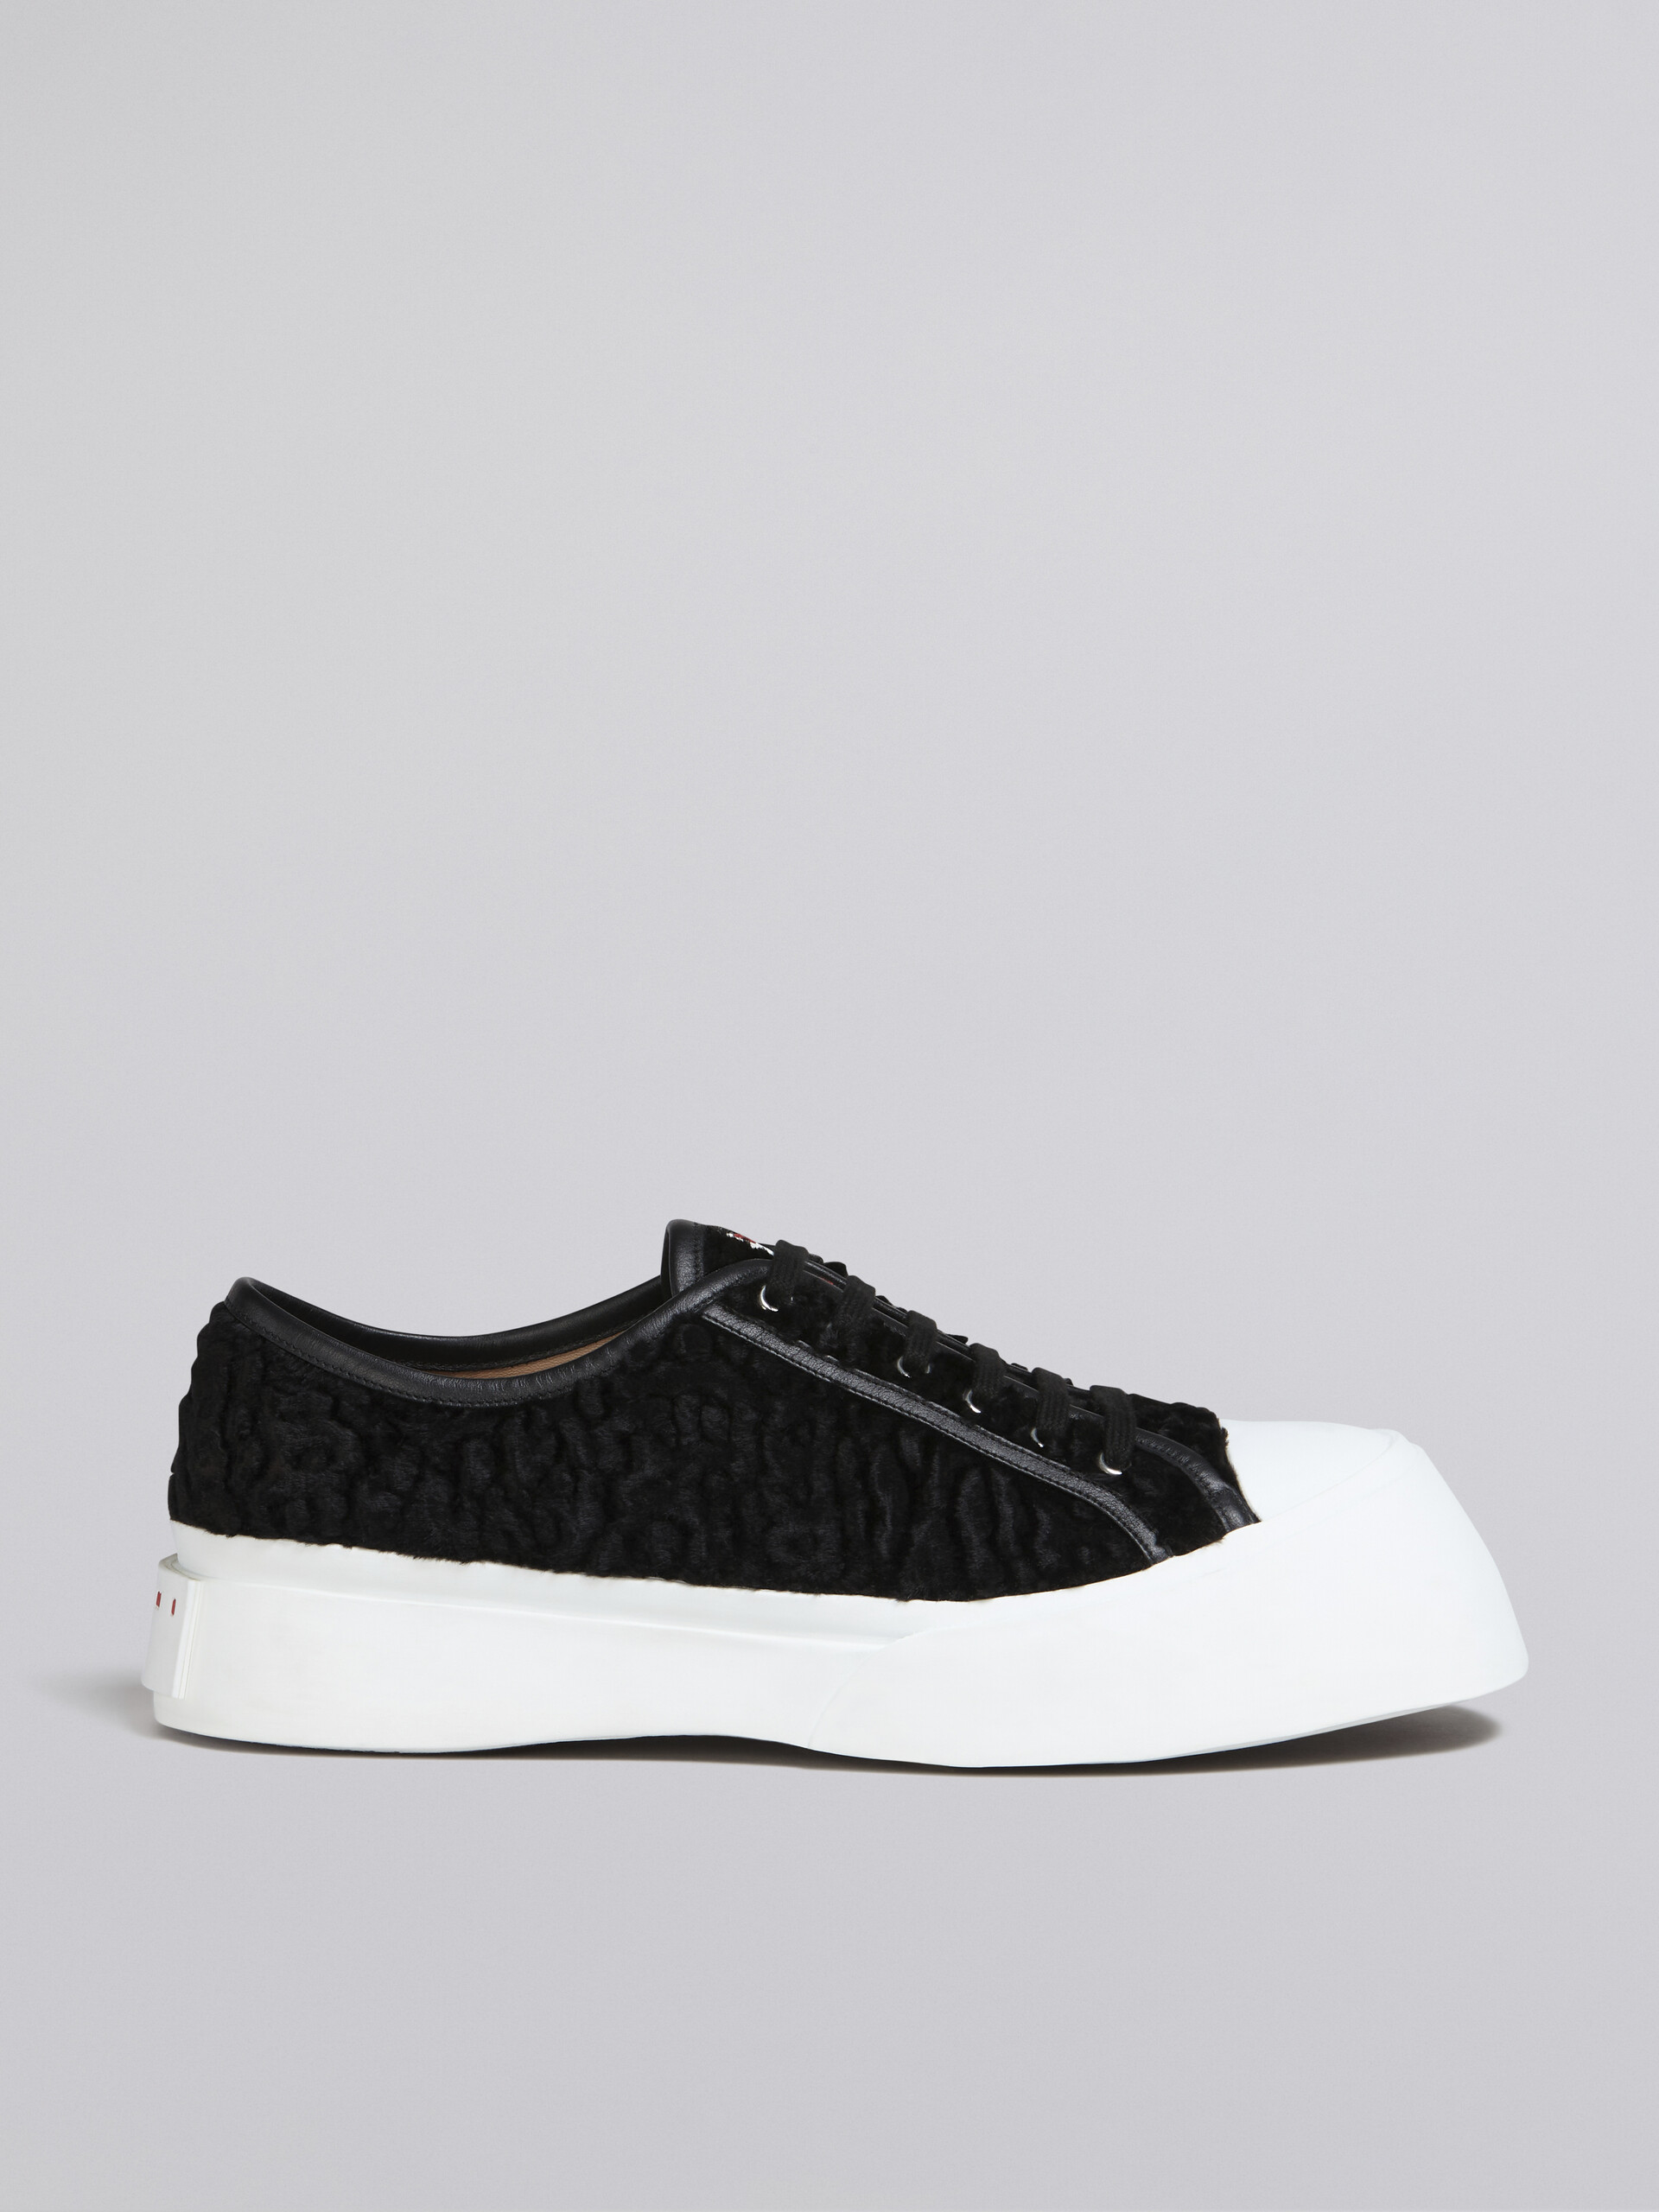 Black soft calf leather PABLO sneaker - Sneakers - Image 1